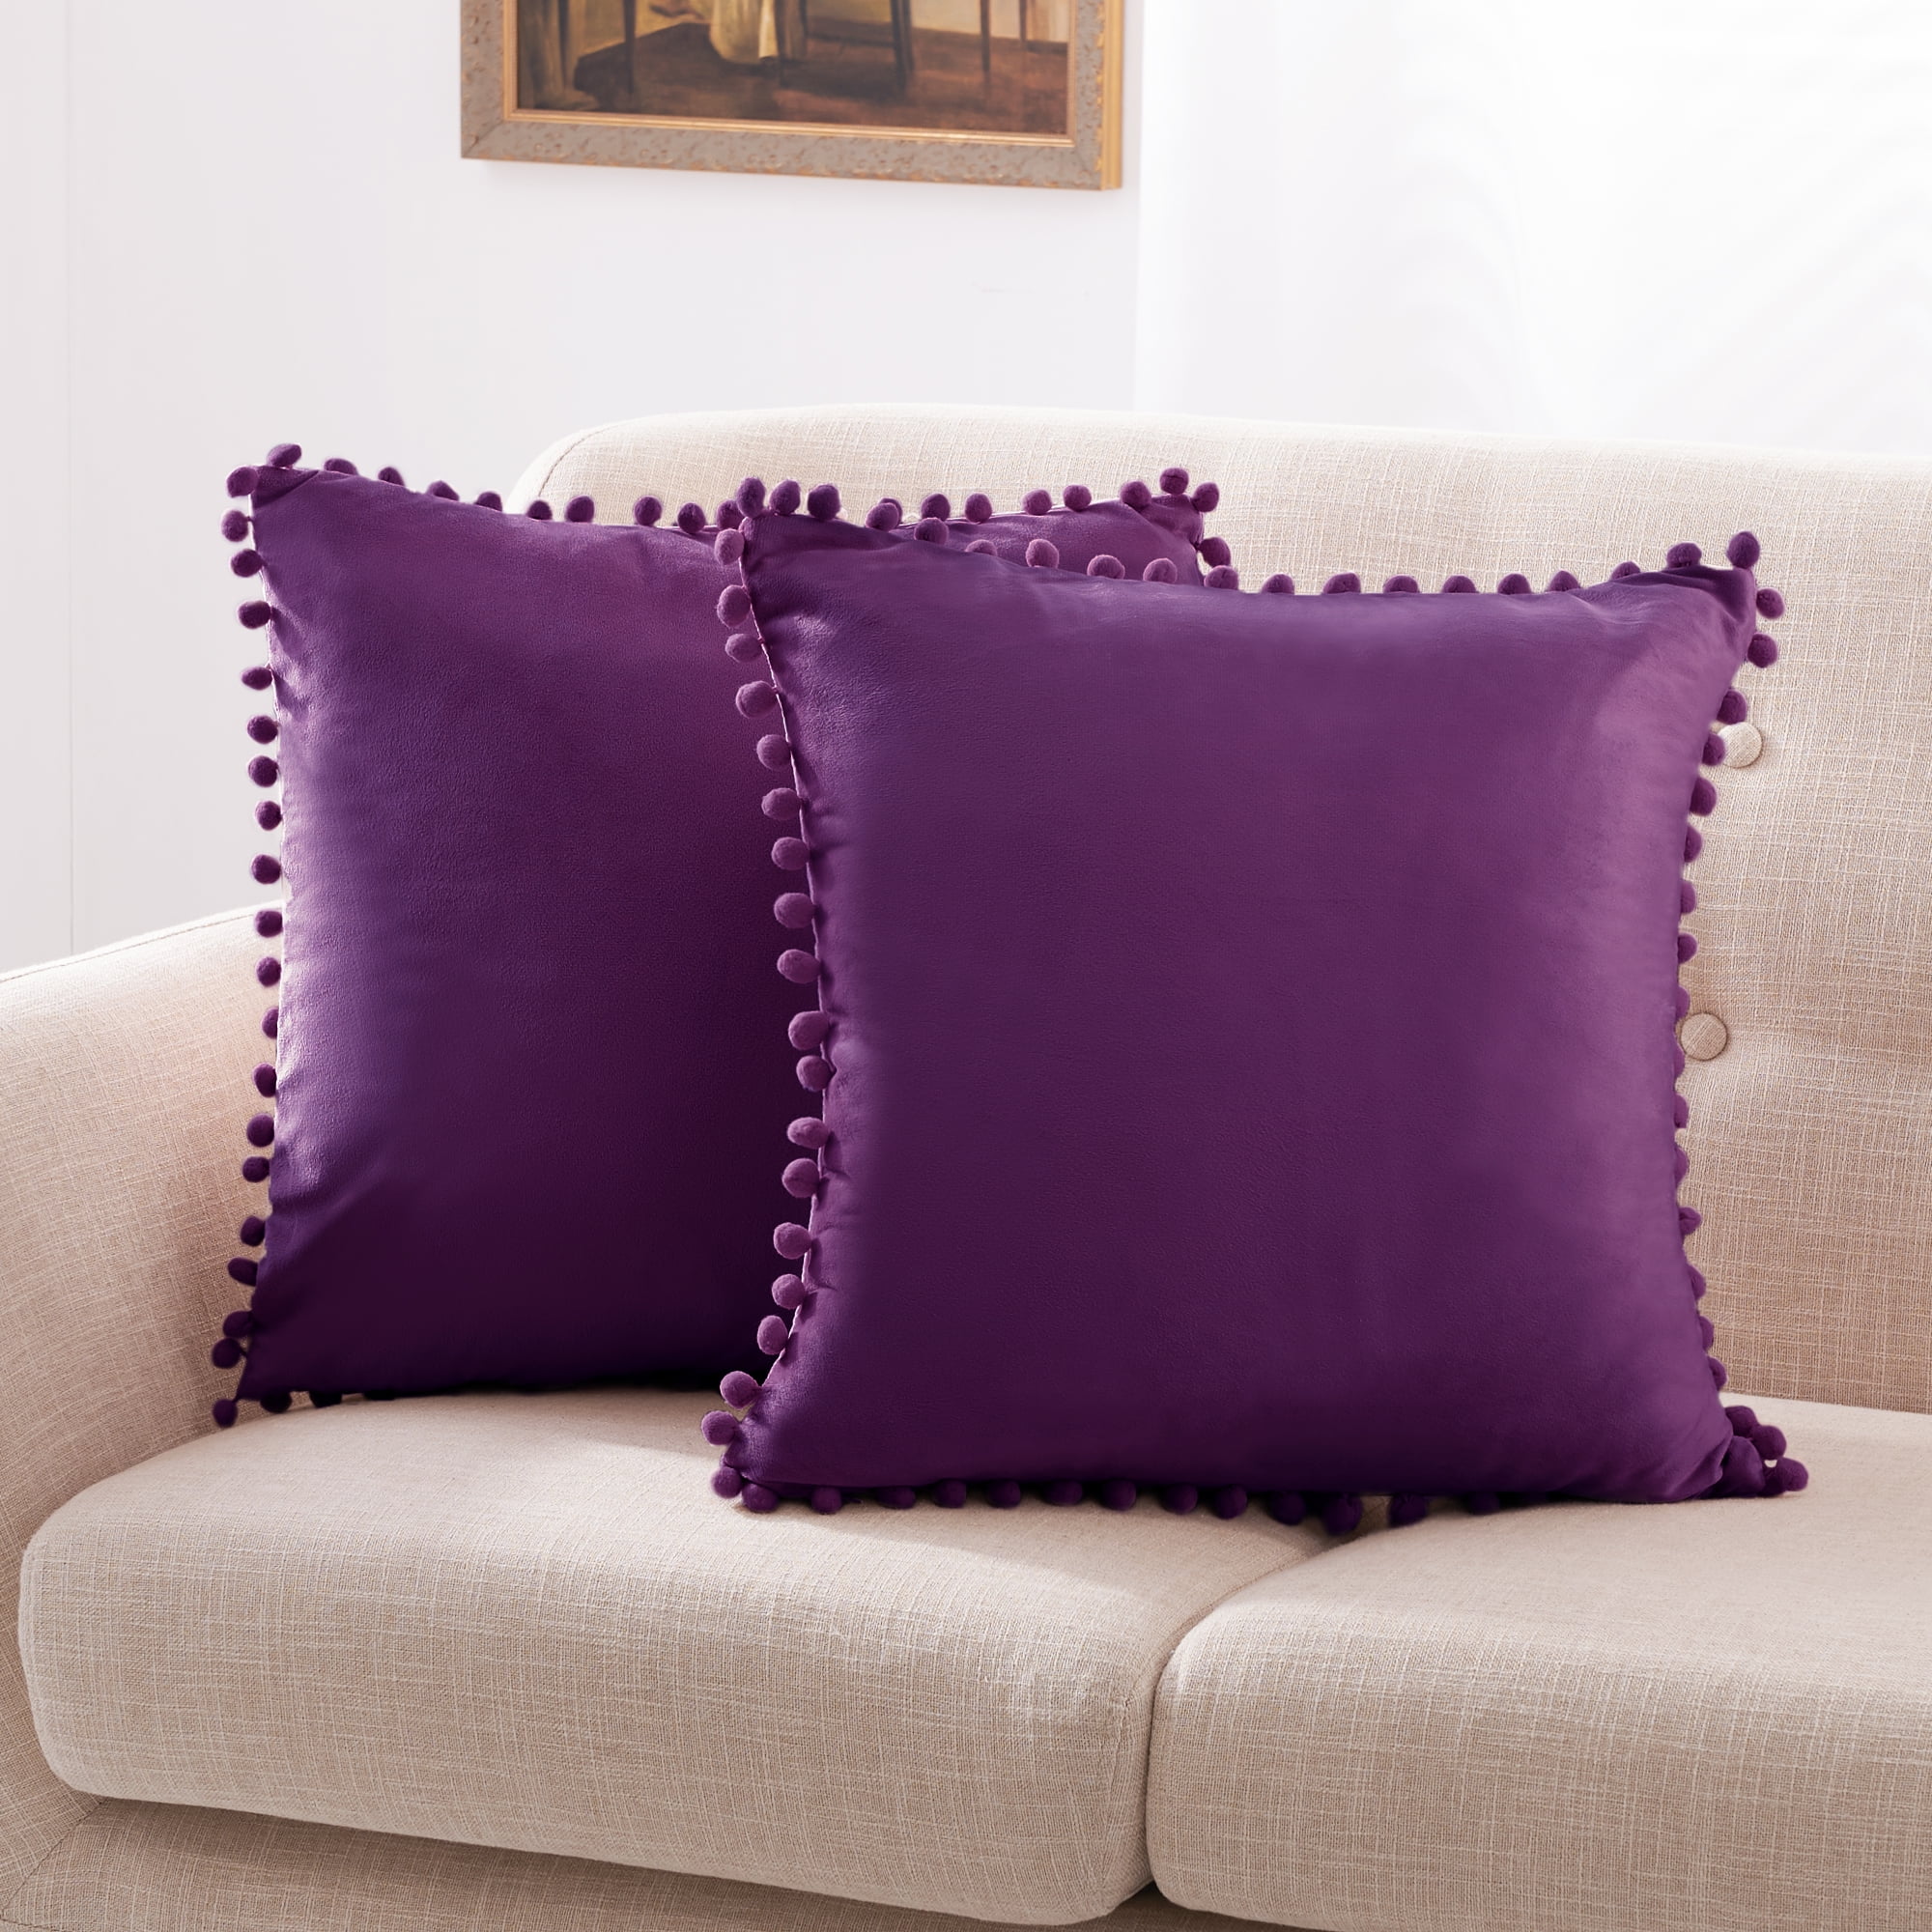 Deconovo Large Sofa Pillow Covers 26x26 inch, Velvet Throw Pillows Covers for Bed, Couch, Sofa, 26 inch x 26 inch, Dark Purple, 2 Pack, Size: 26 x 26